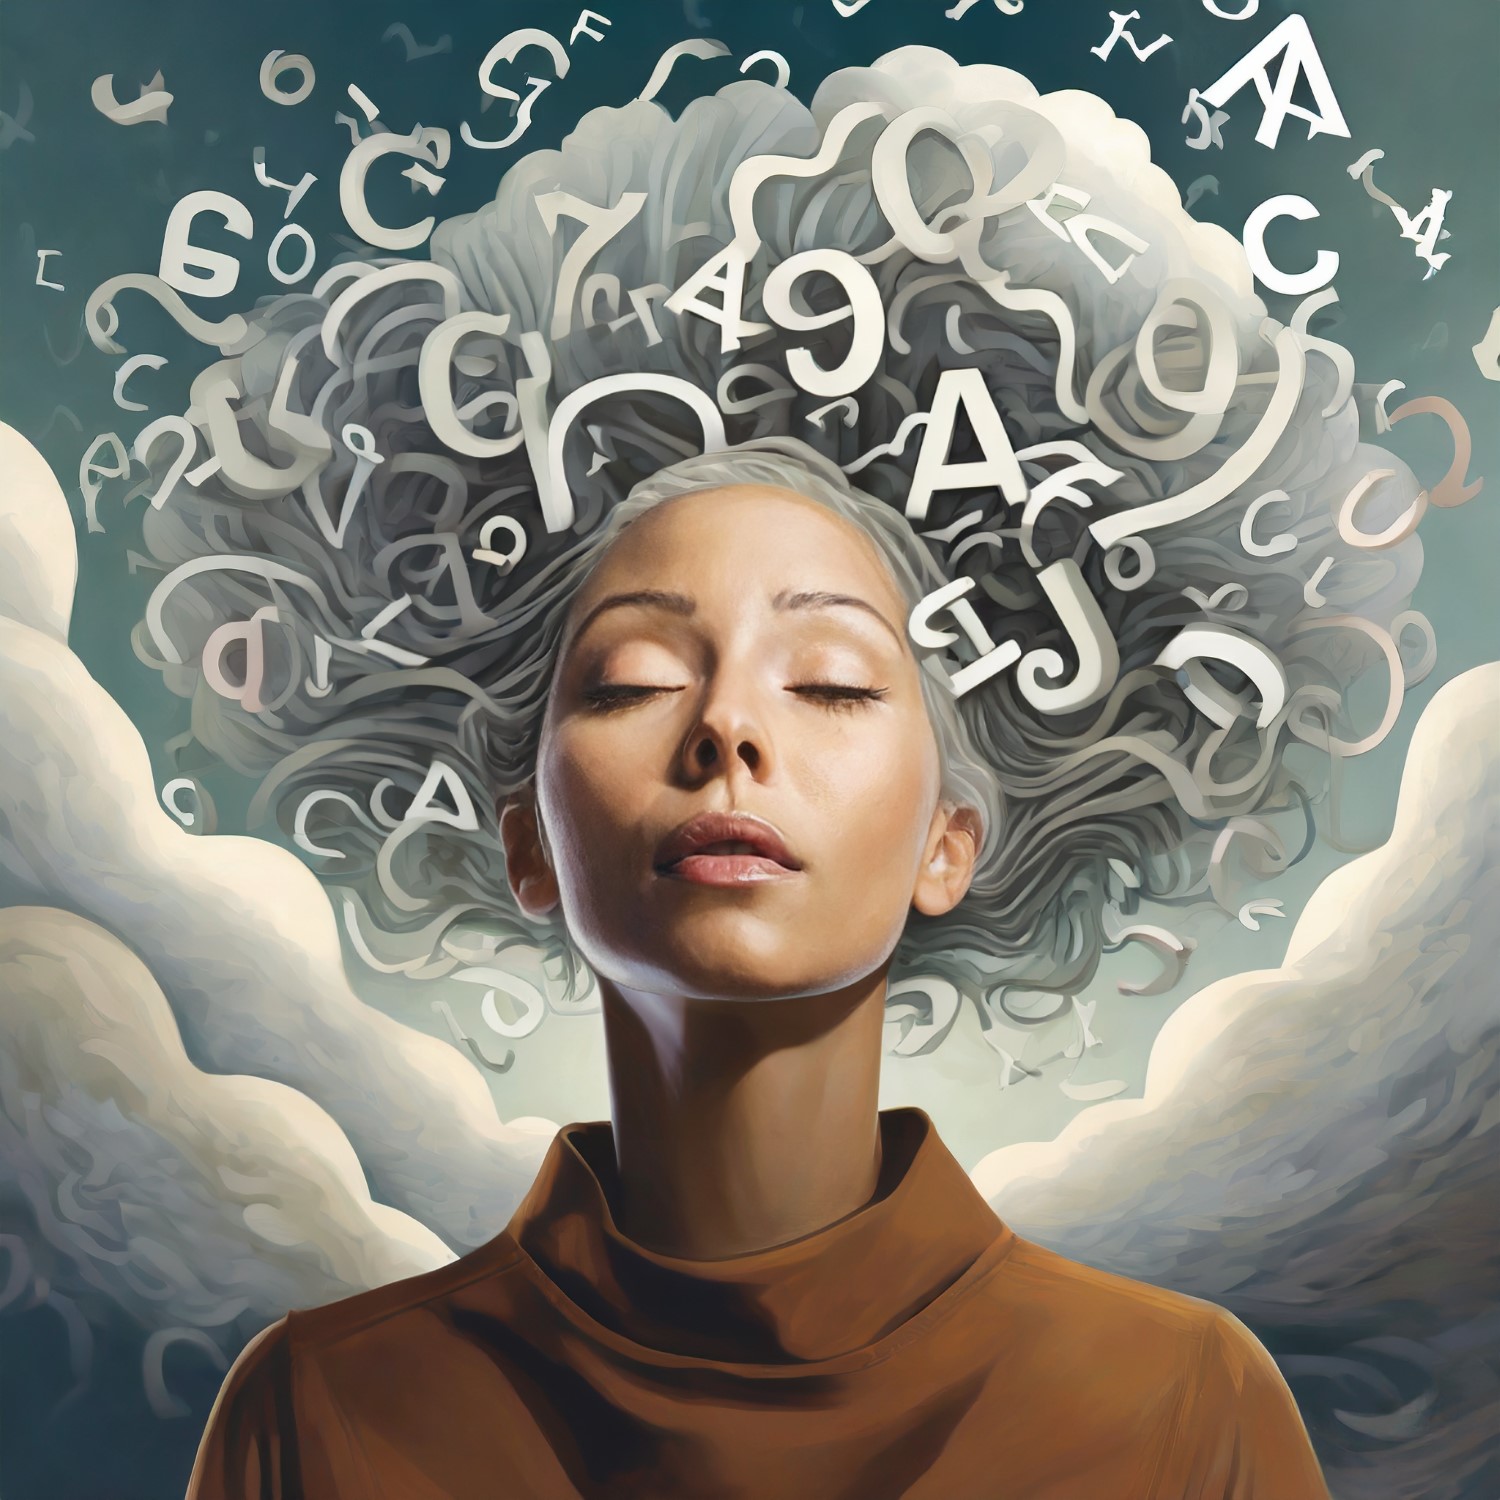 Decorative image of serene female with letters floating all around head